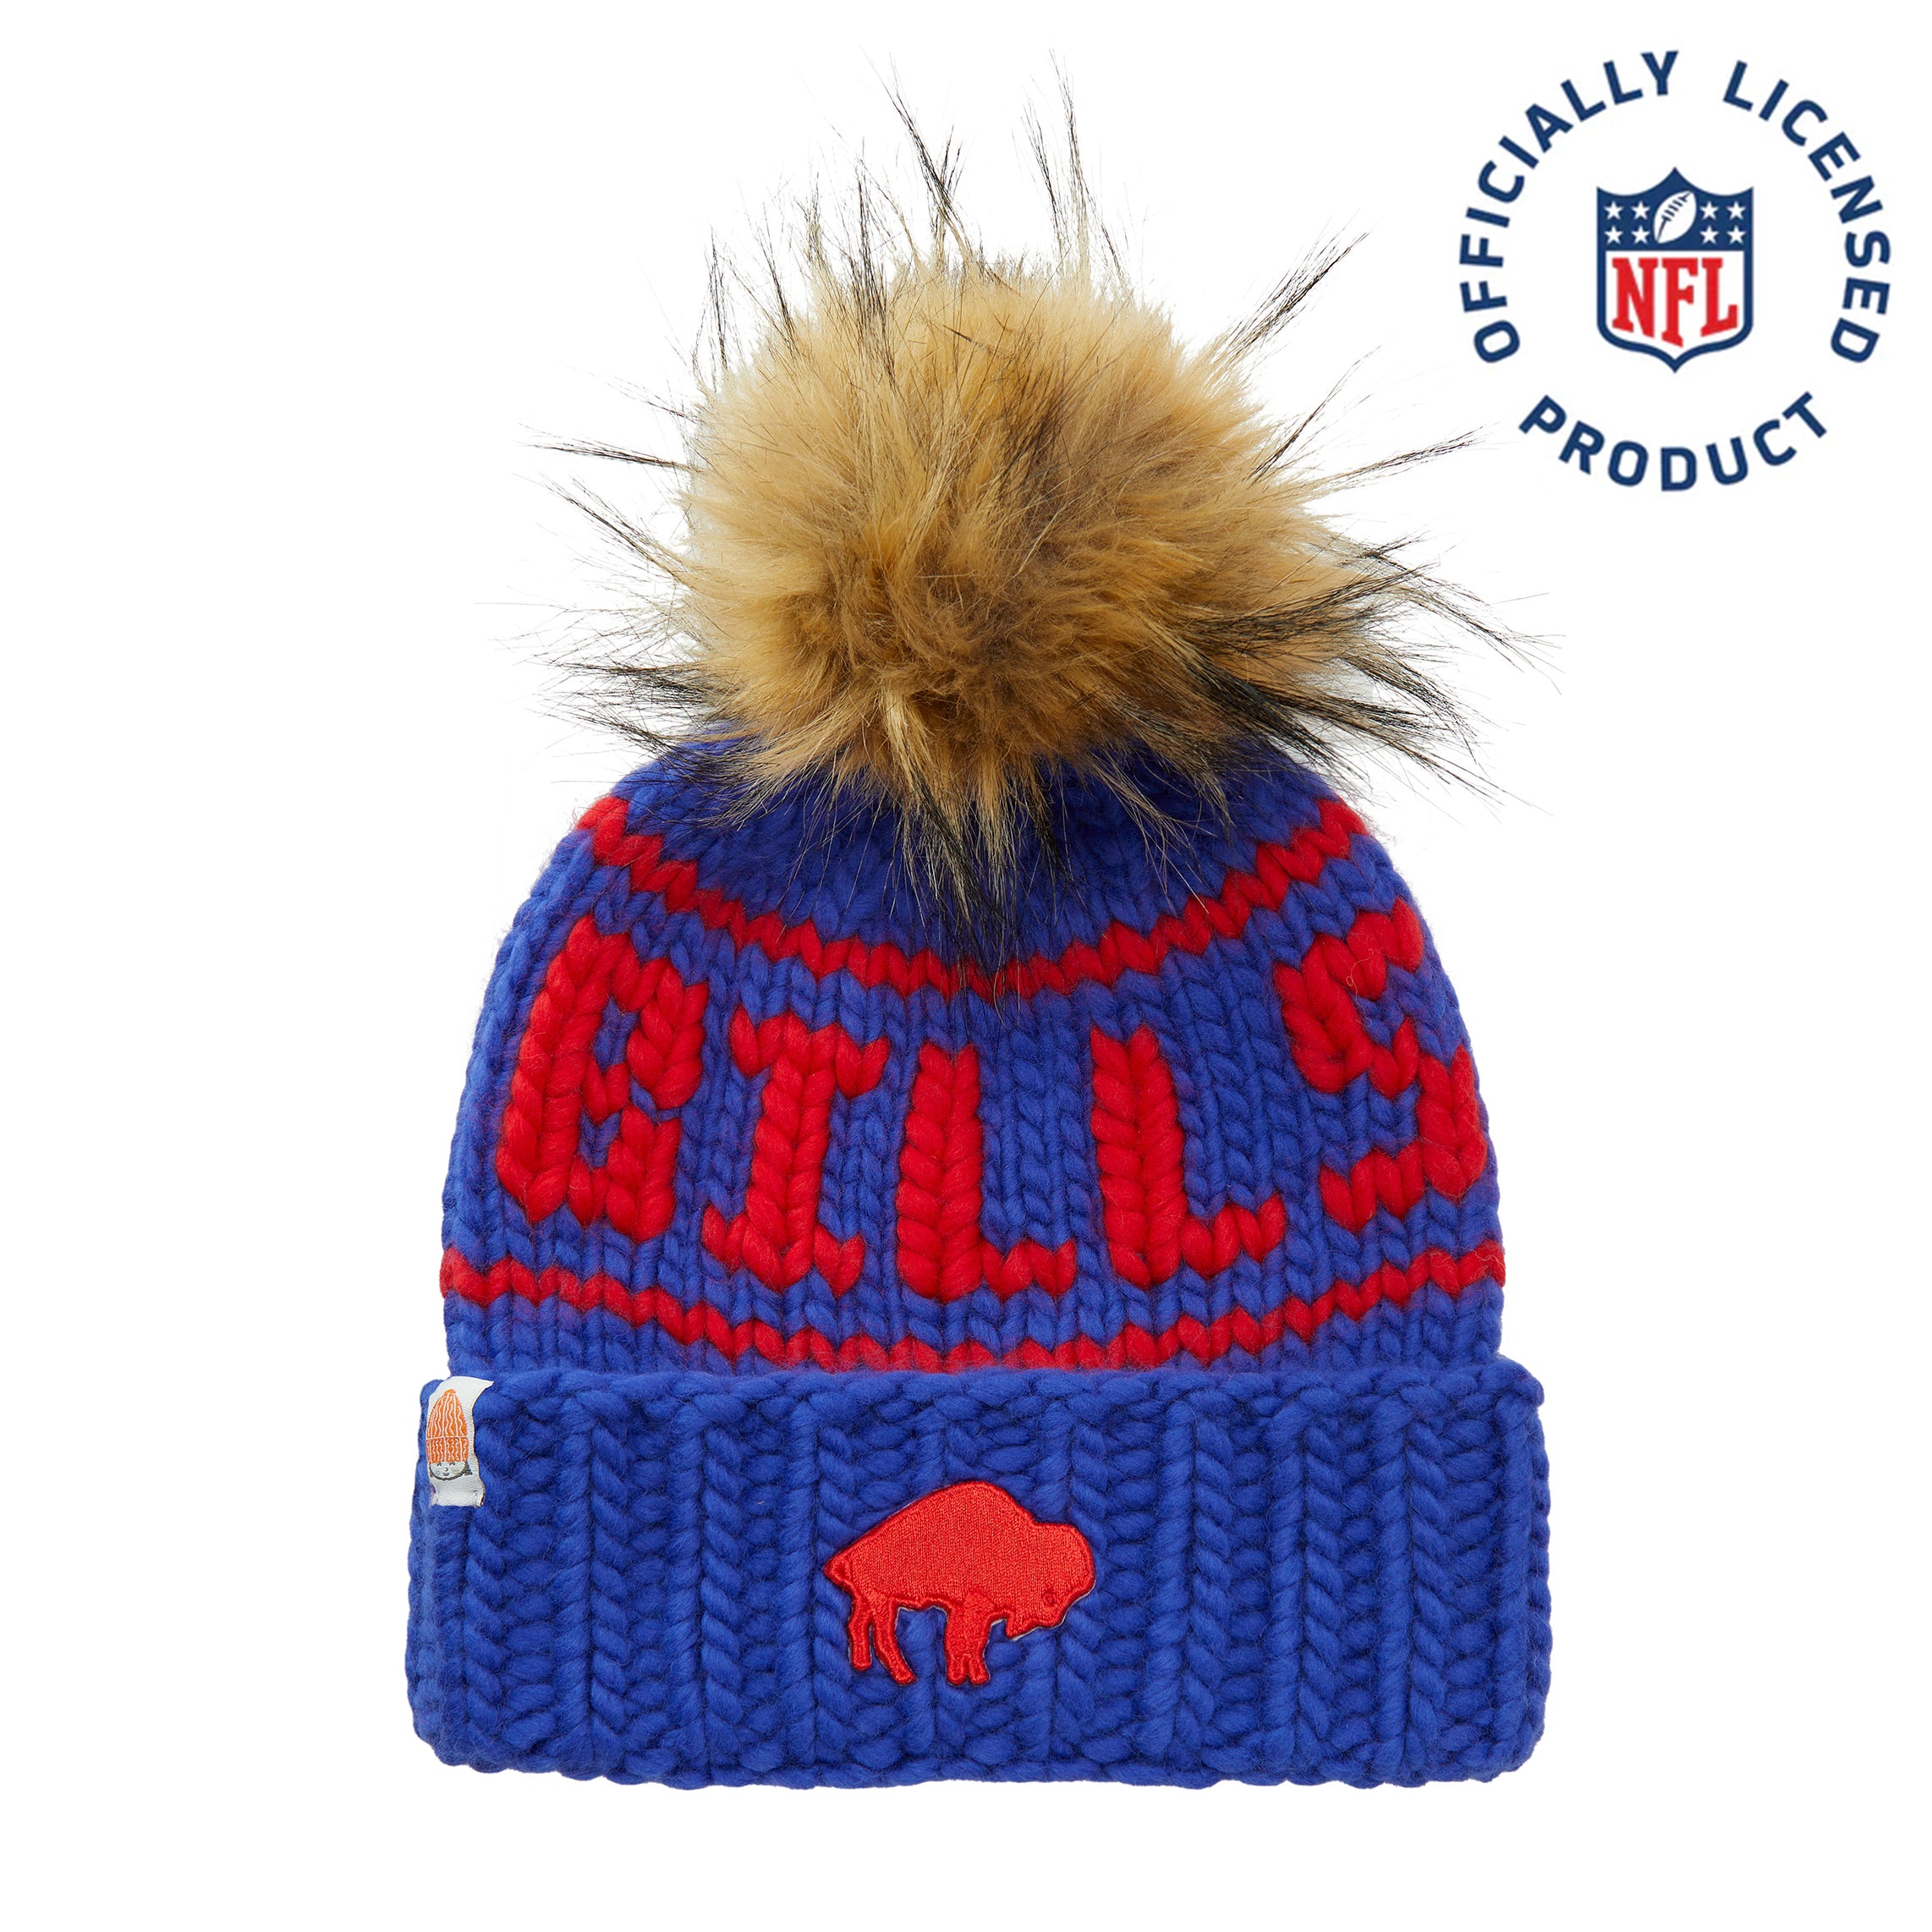 The Retro NFL Bills Beanie with Faux Fur